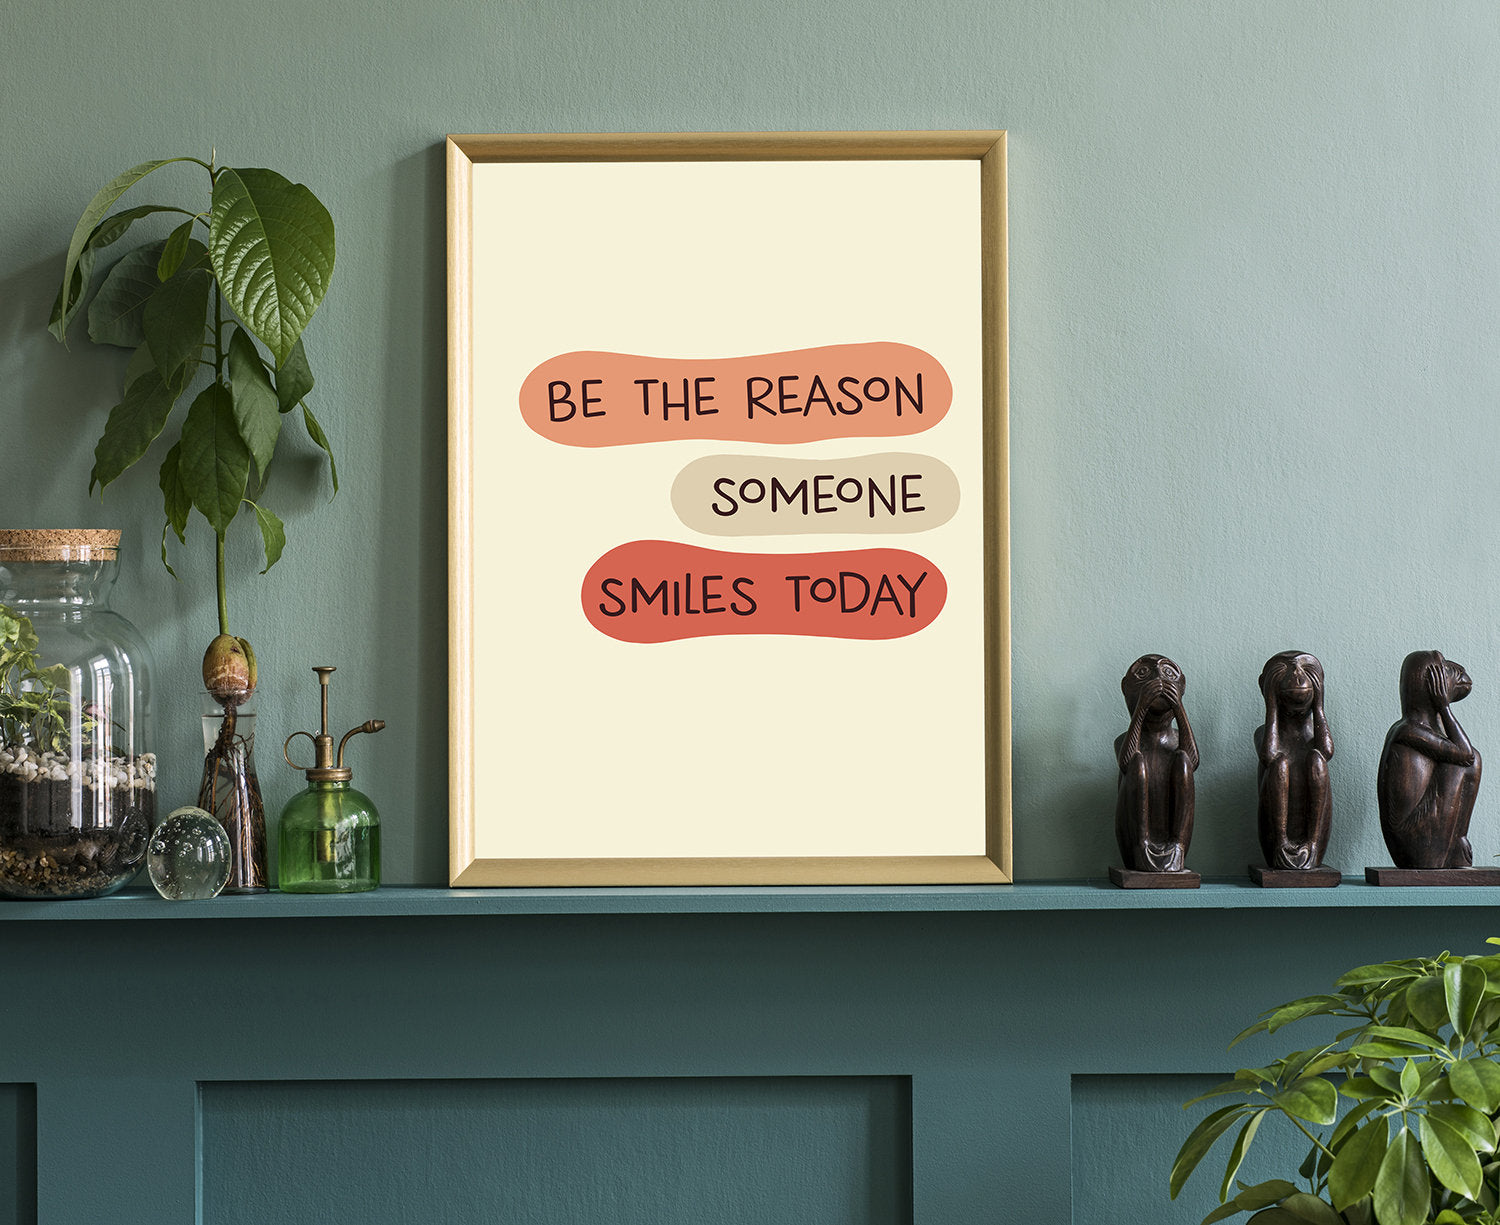 Be the reason someone smiles today, Quote, Inspirational Poster, Home art prints, Home decor, Dorm rooms wall decor, Office wall art, Poster